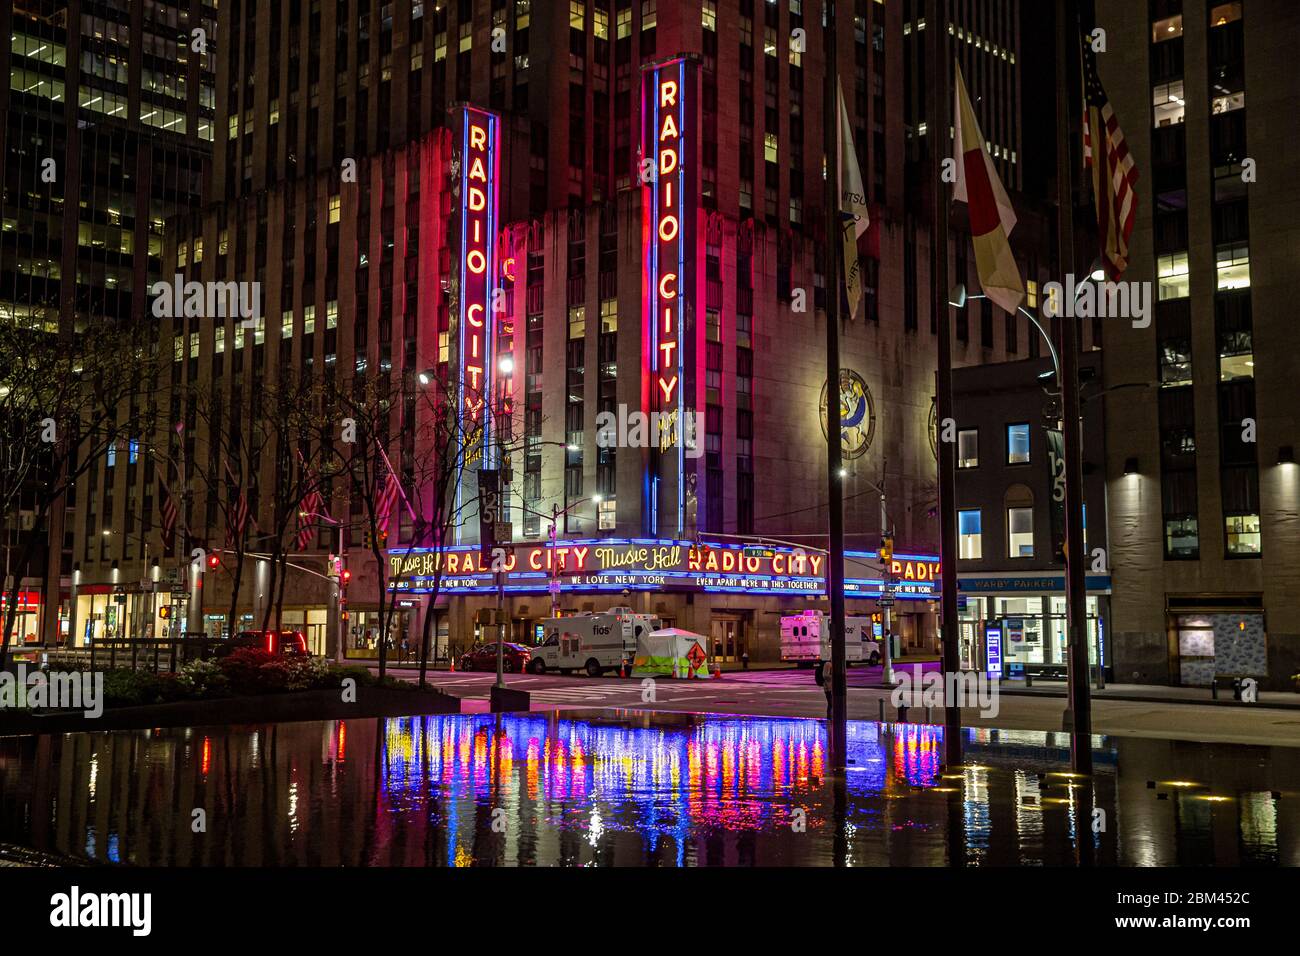 New York, N.Y/USA – 1st May 2020: Radio City Music Hall is quiet due to  health risks of the COVID-19. Credit: Gordon Donovan/Alamy Live News Stock  Photo - Alamy